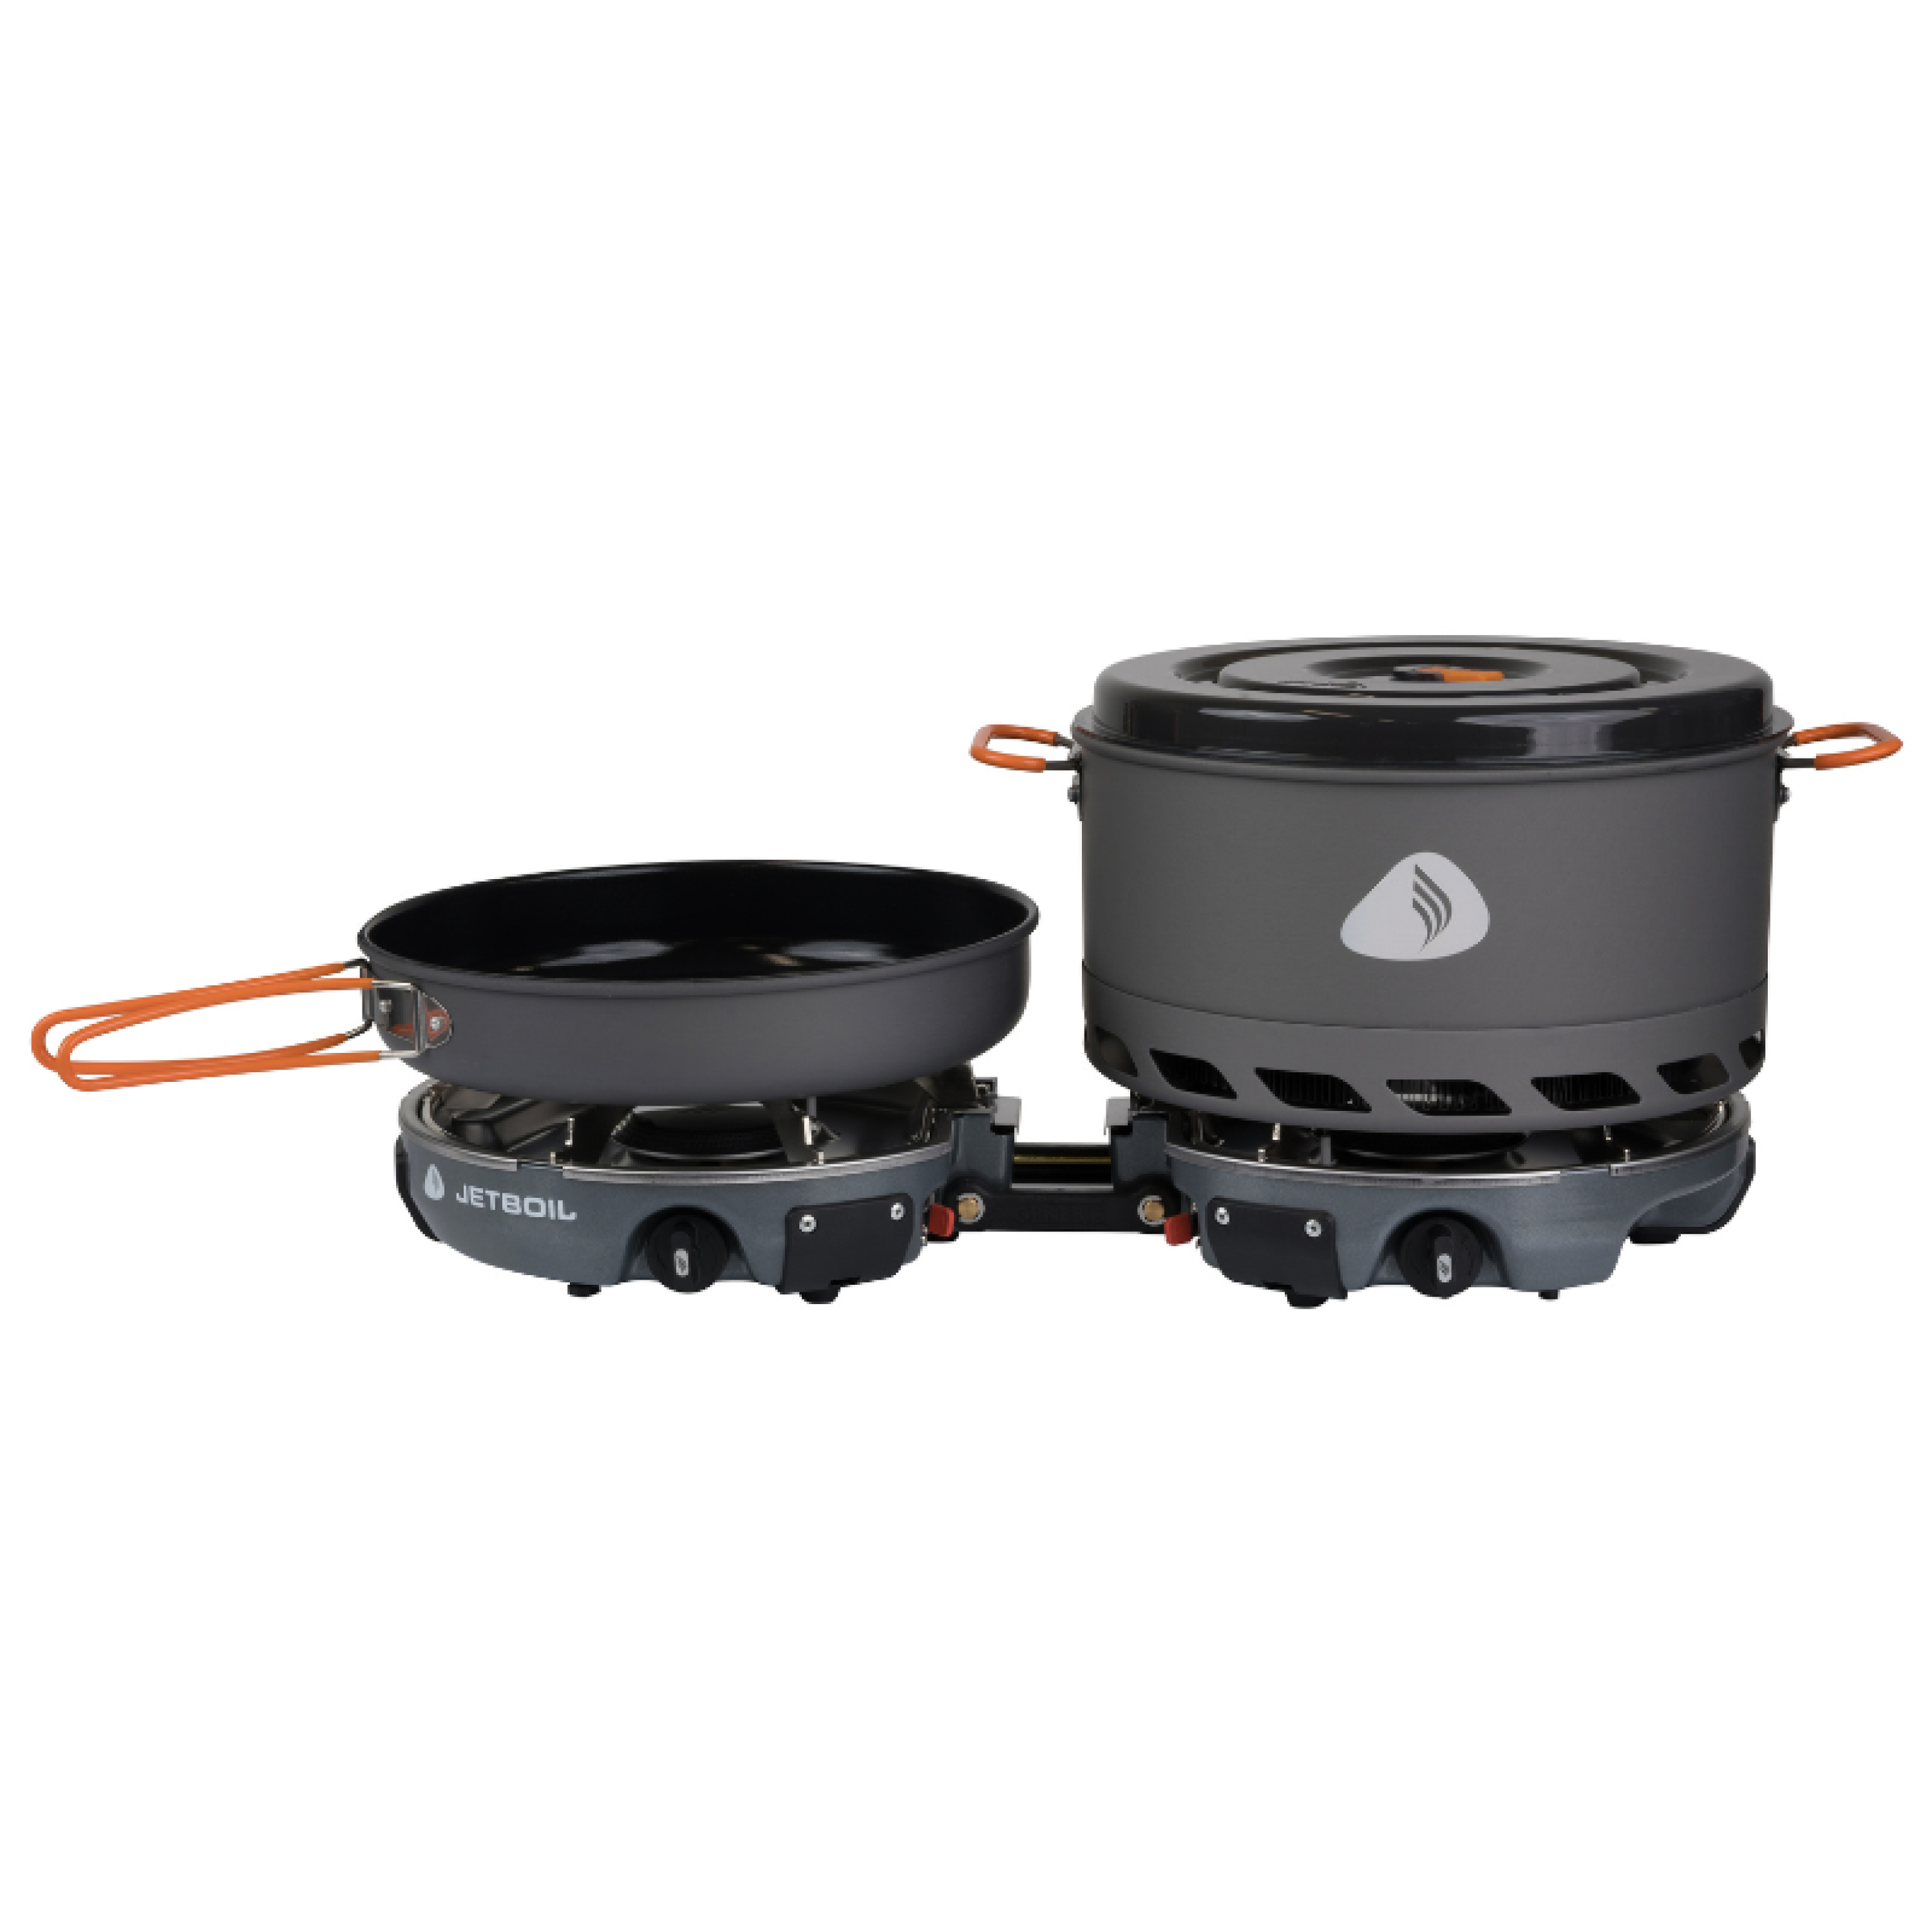 dc3e111d/jetboil stove camping 1 png